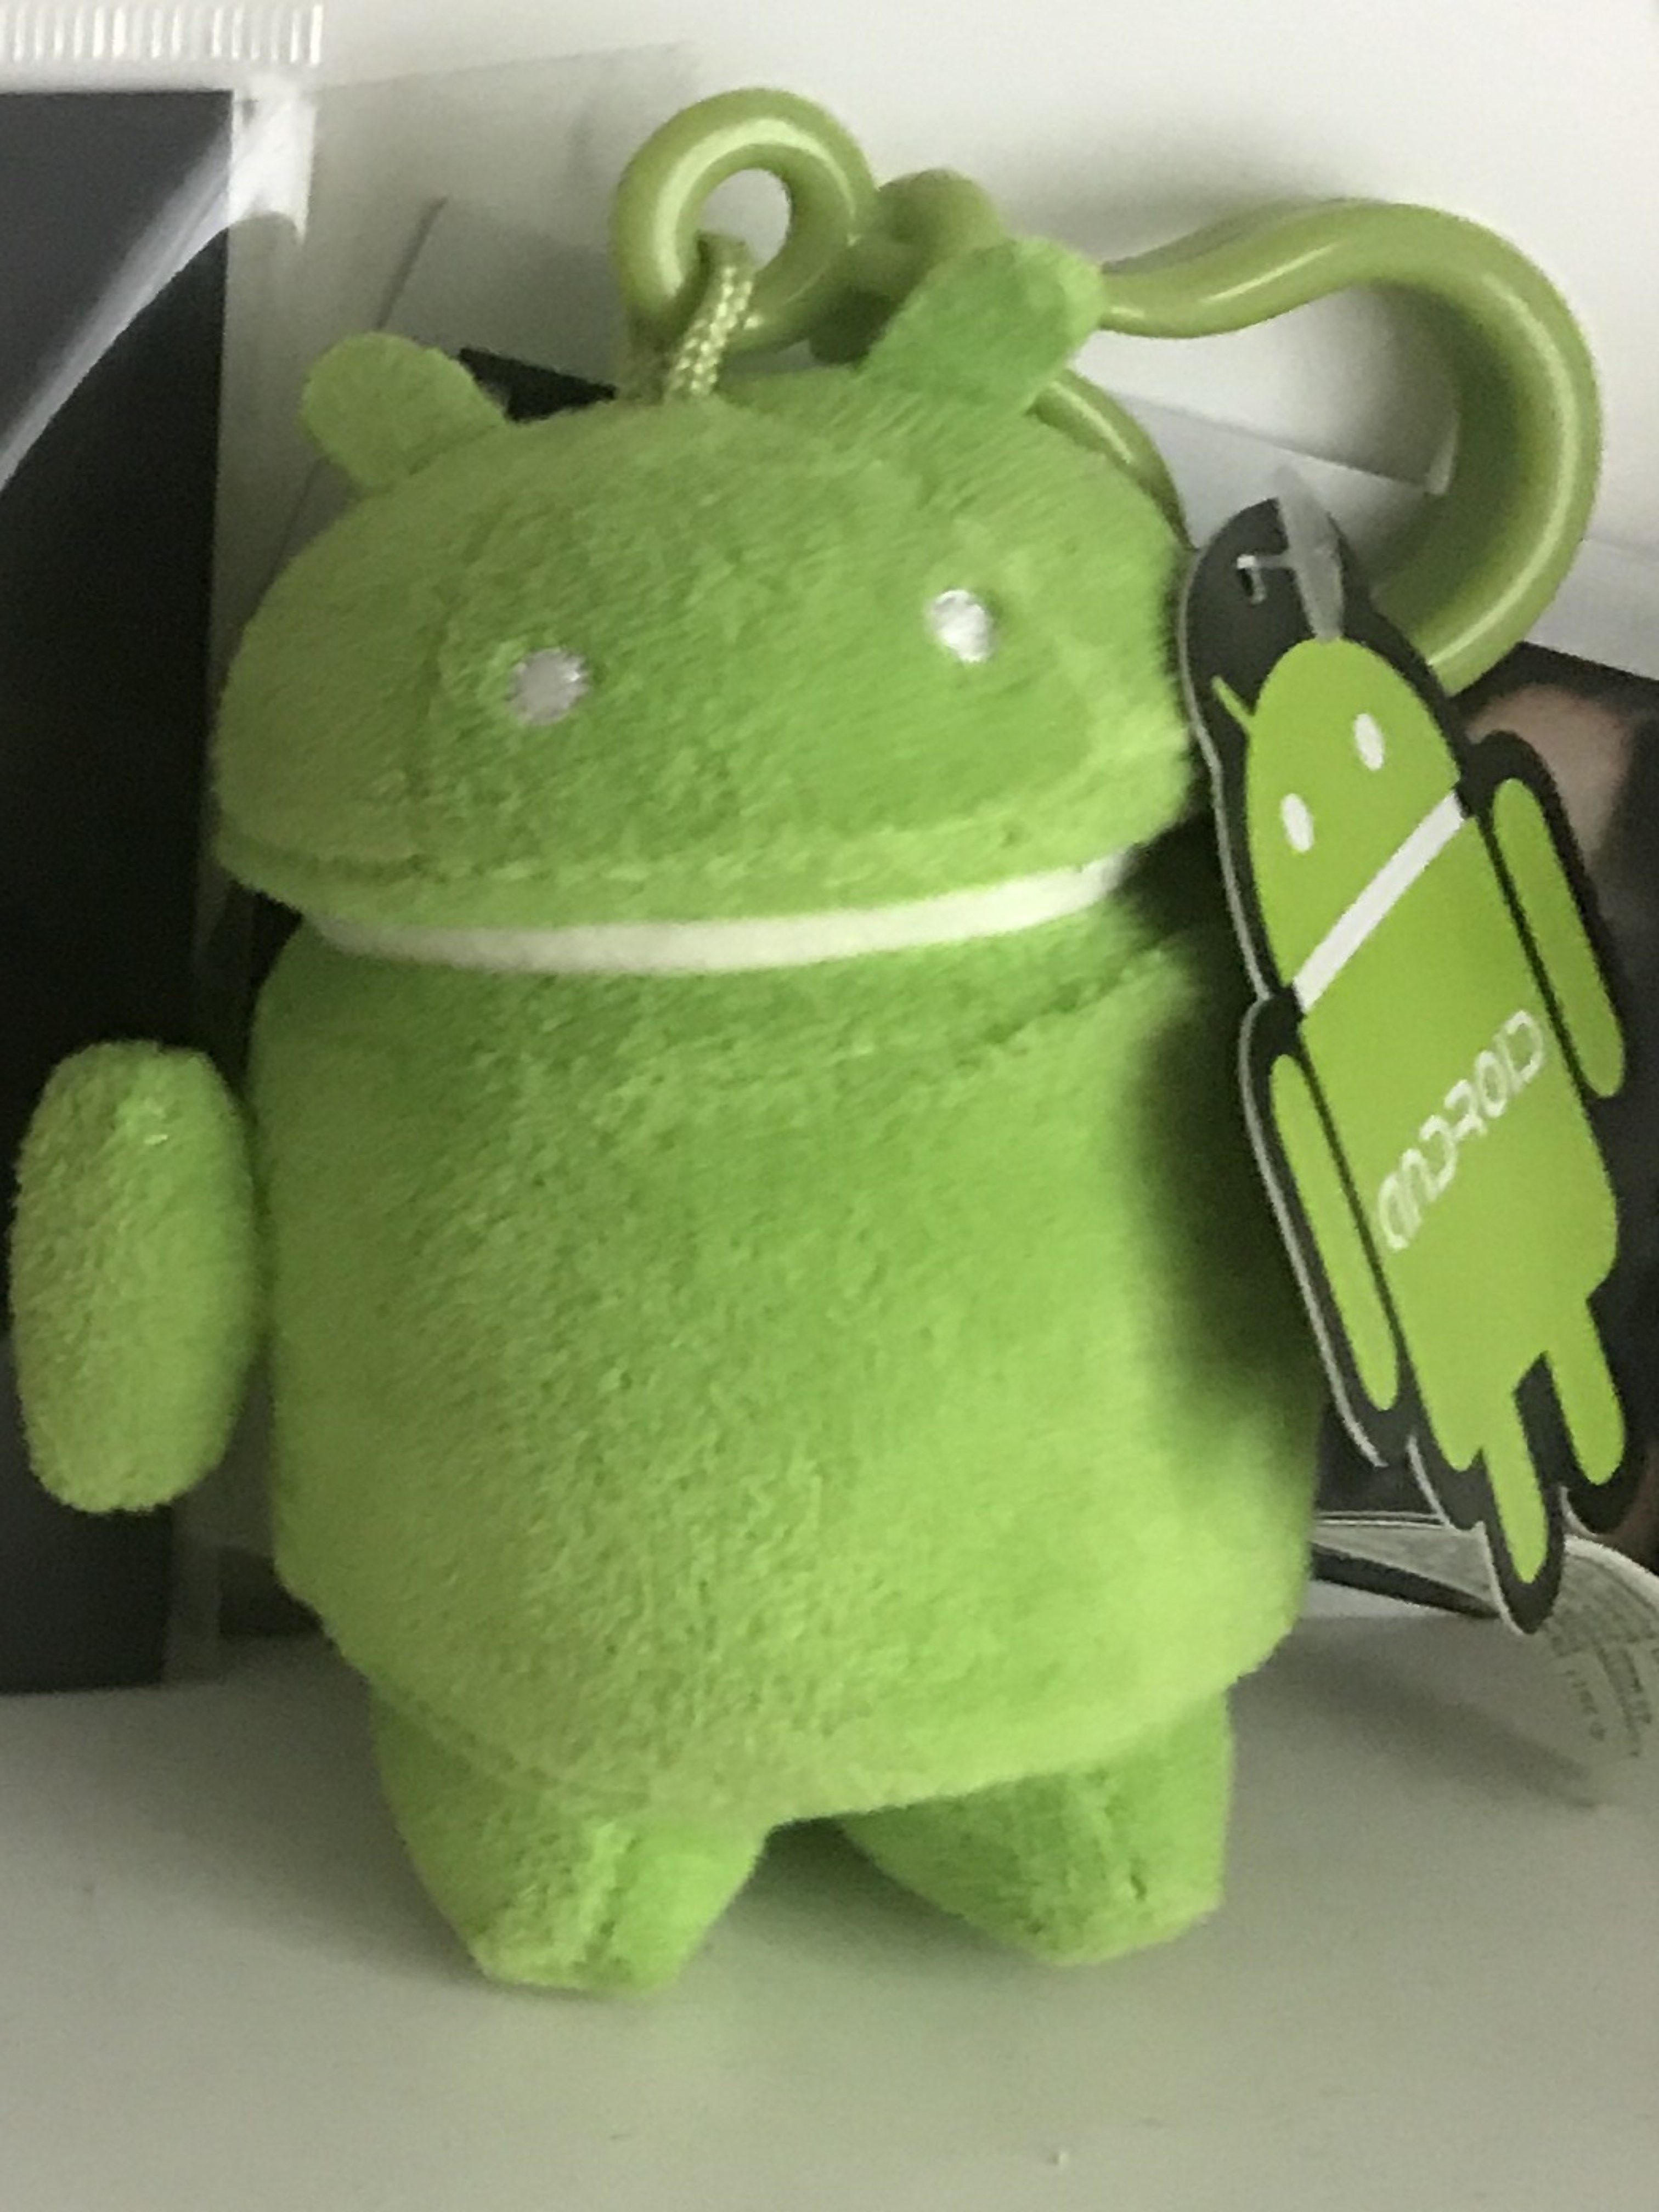 Toy android